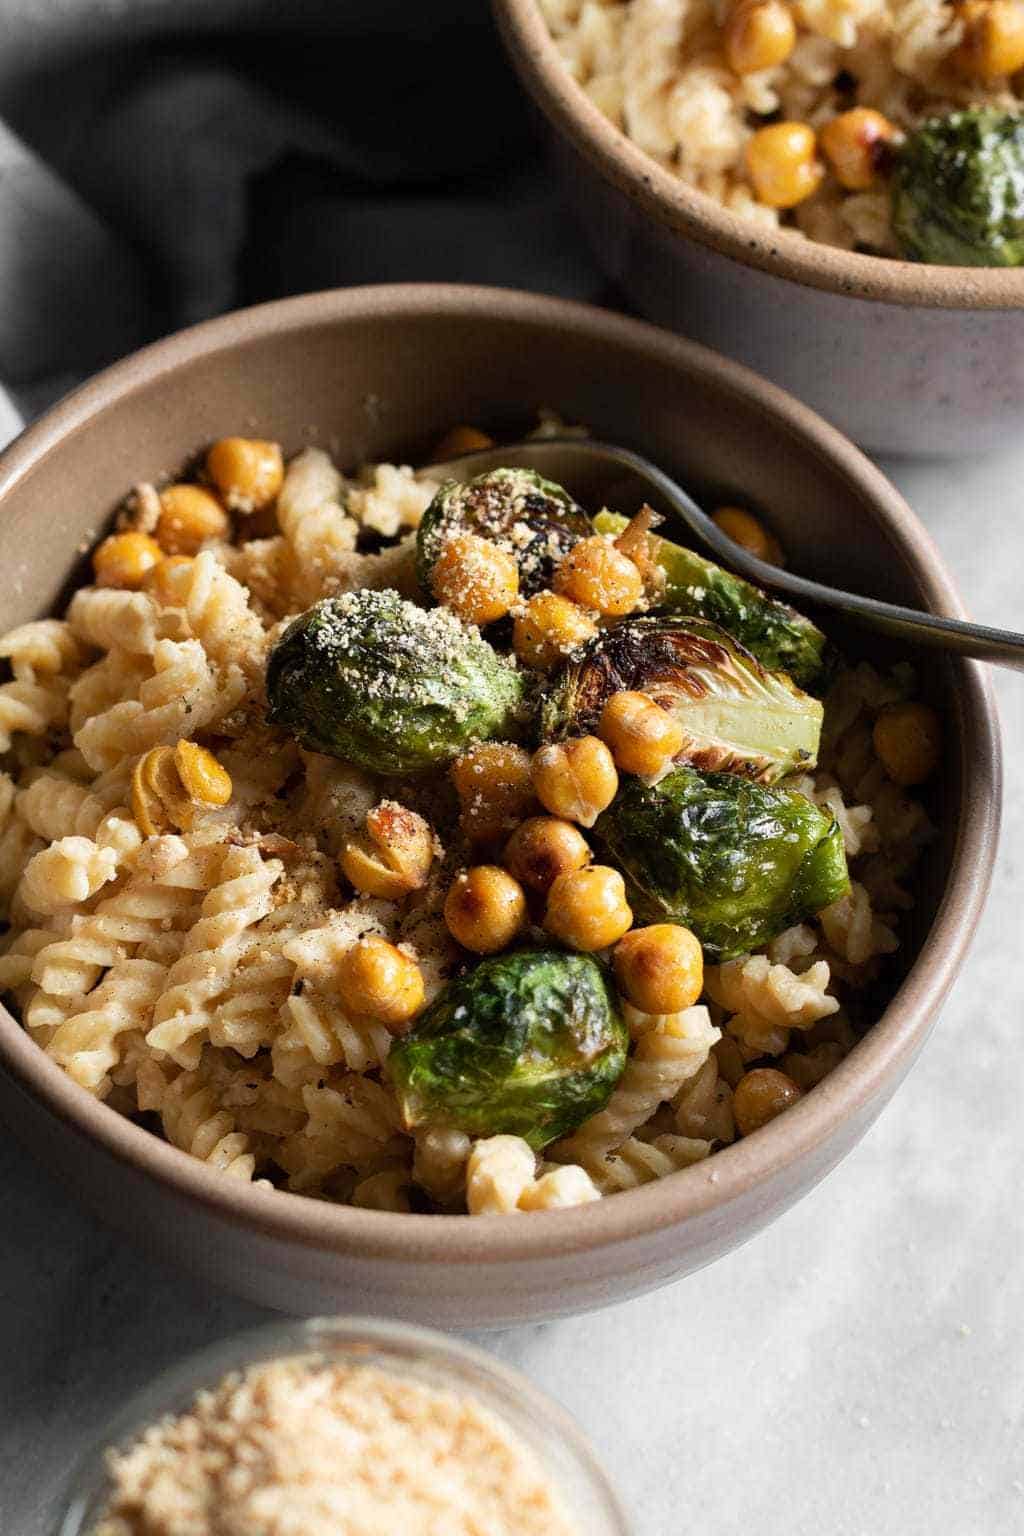 Creamy Hummus Pasta with Roasted Brussels Sprouts